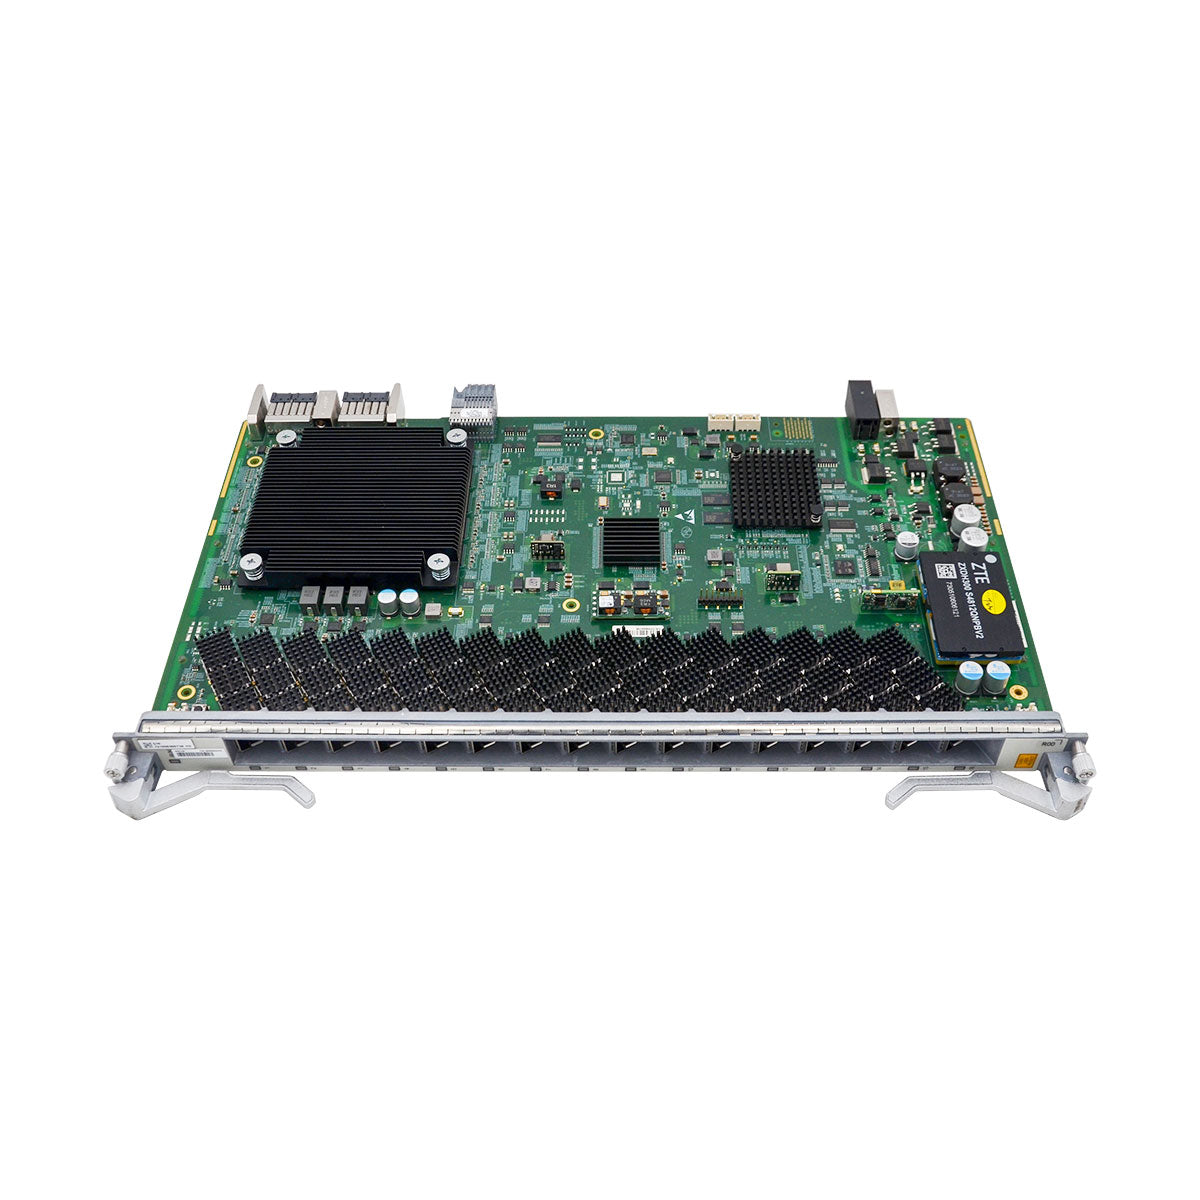 ZTE GFBL 16-port XG-PON and GPON Combo Board for ZXA10 C600 series OLT